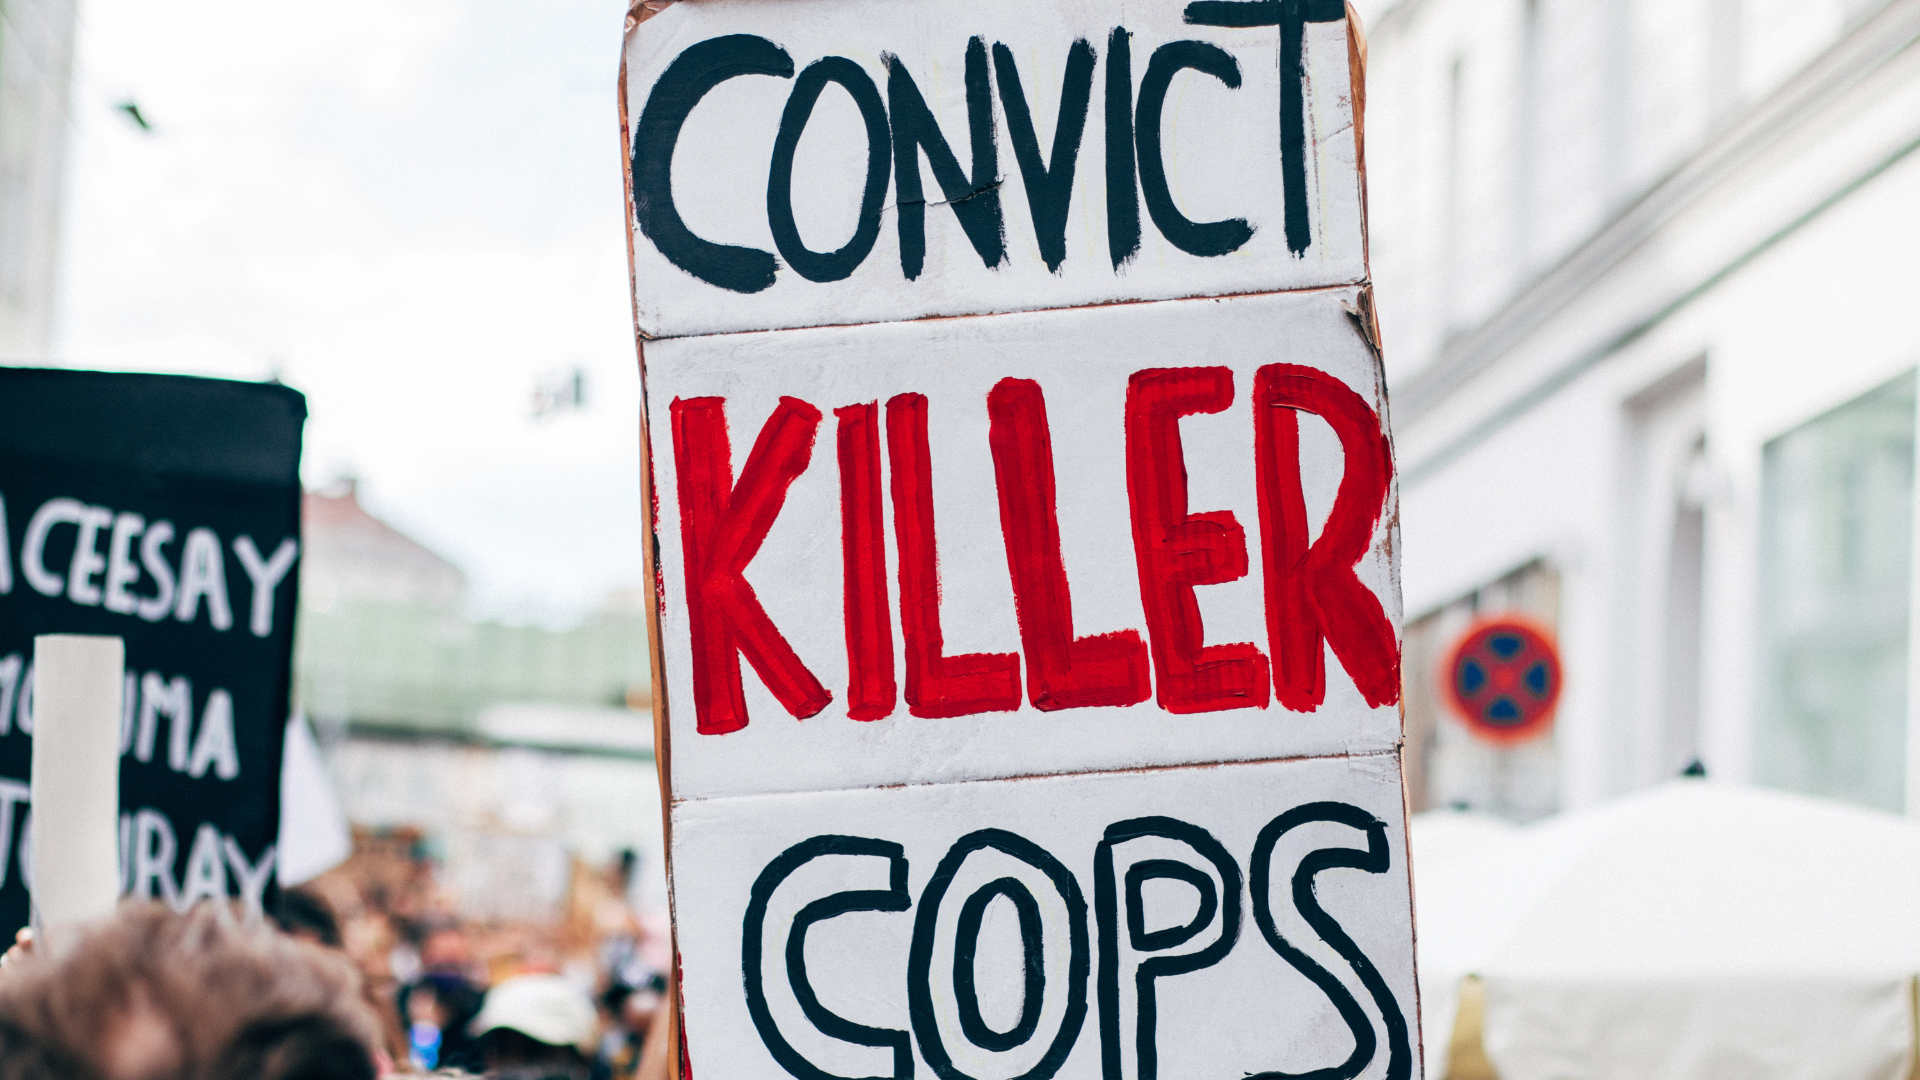 Black Lives Matter Austria, close-up picture of Convict Killer Cops sign. Image credit: Ivan Radic / Wikimedia Commons